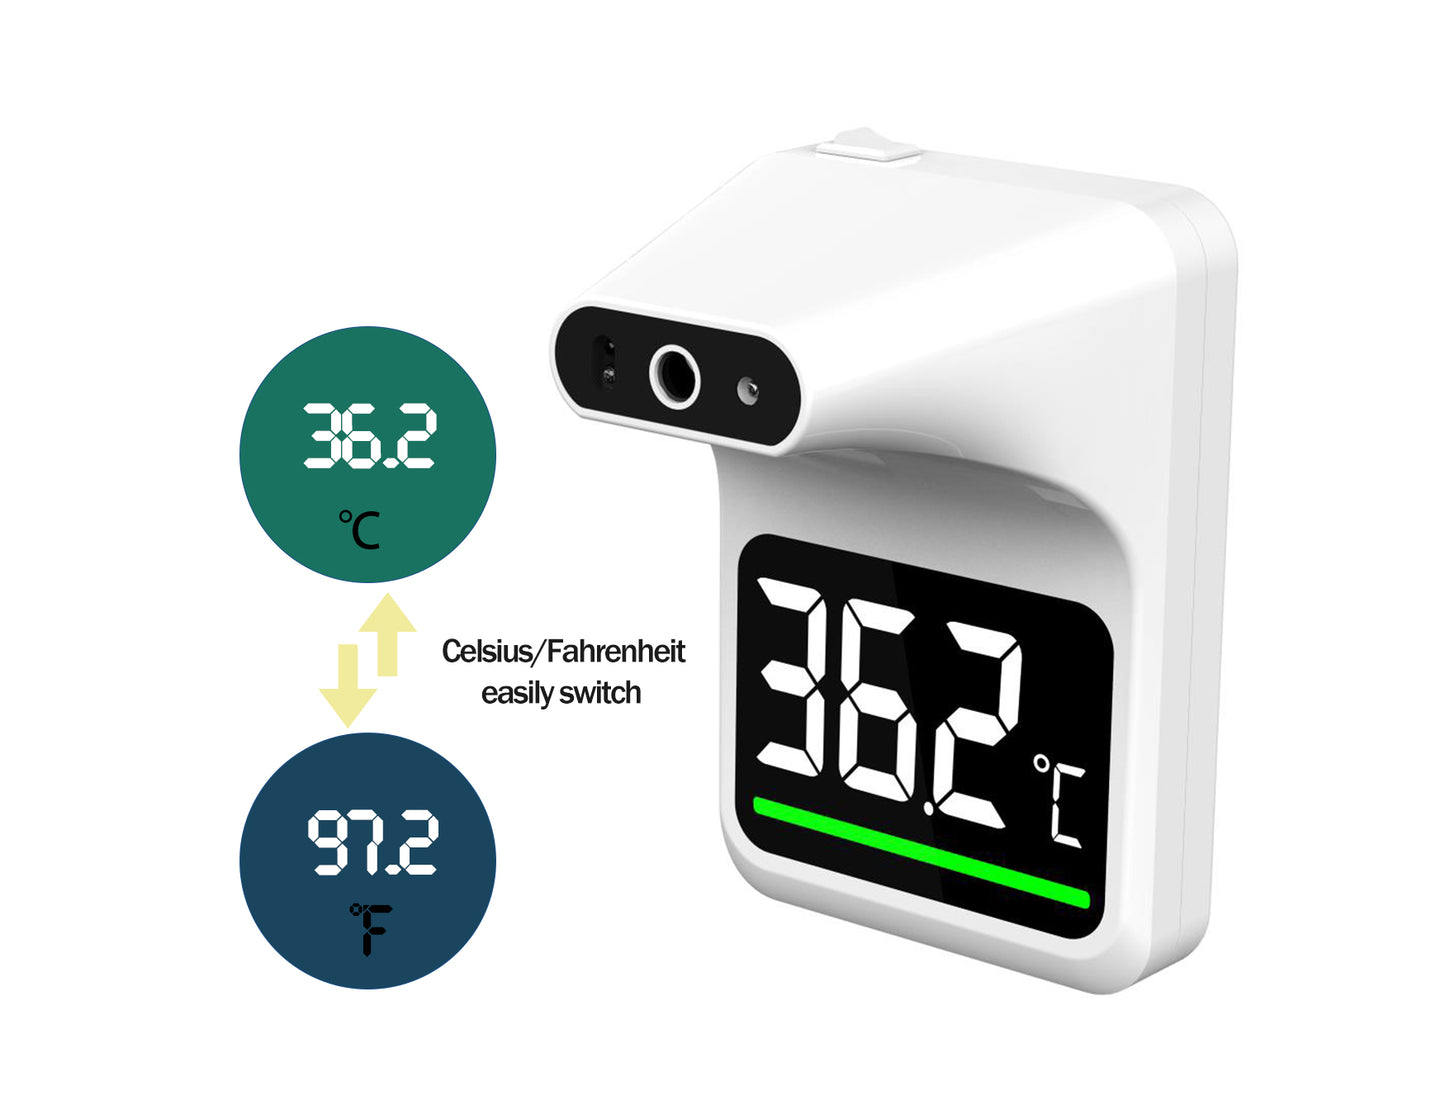 SmileCare Non-contact Digital Infrared Wall Mount Forehead Thermometer Touchless for Schools, Offices, Businesses, Fever Alarm - Powered by www.SmileCareHealth.com